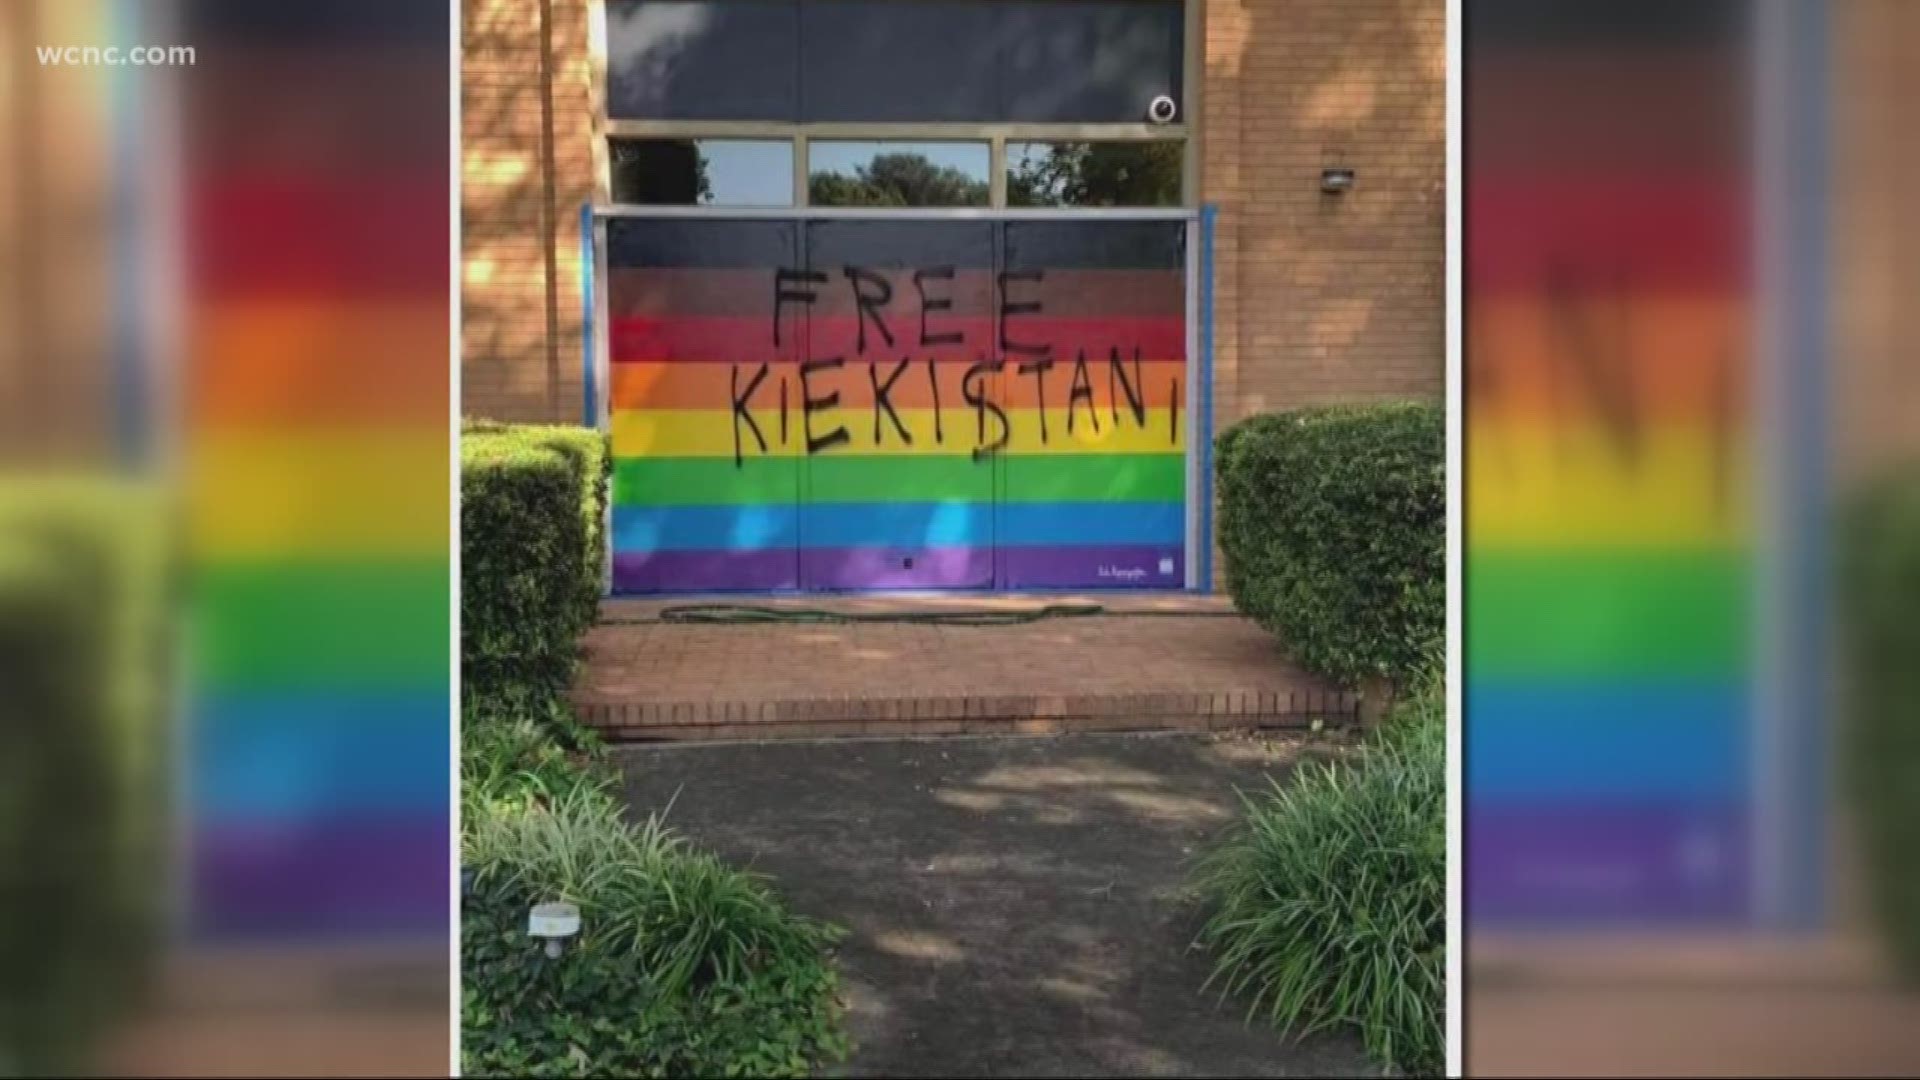 The LGBT-friendly church has been targeted before over the past several years.